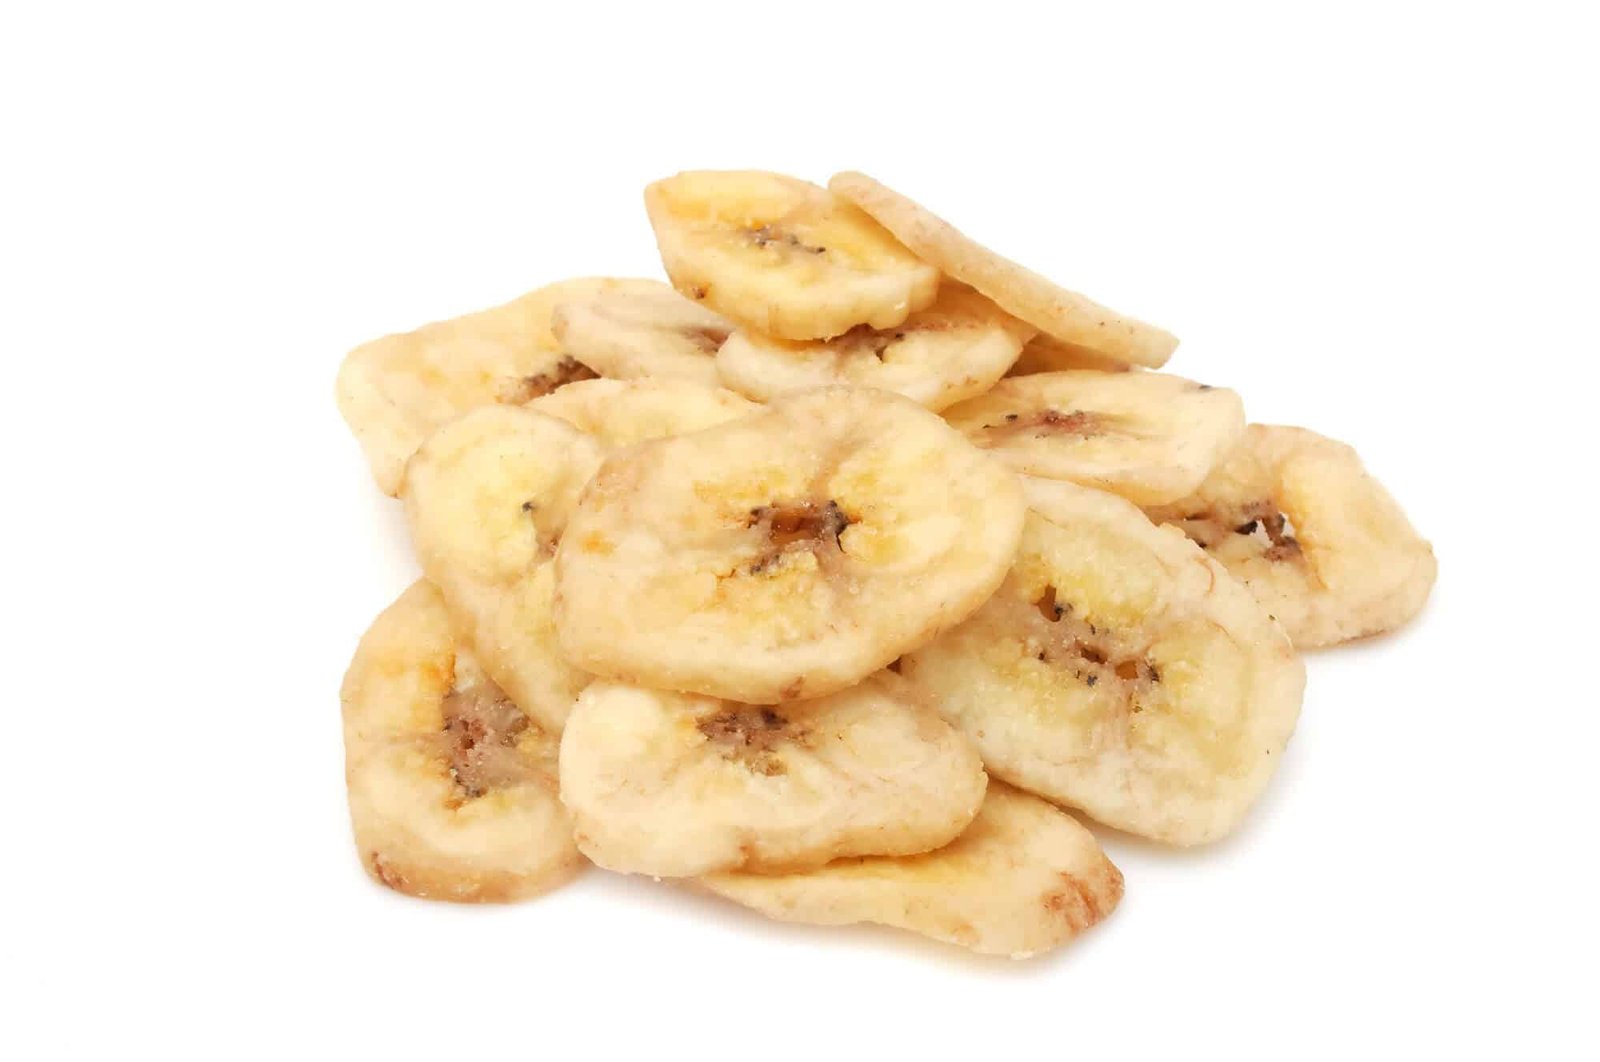 stacked dehydrated banana chips on a white background